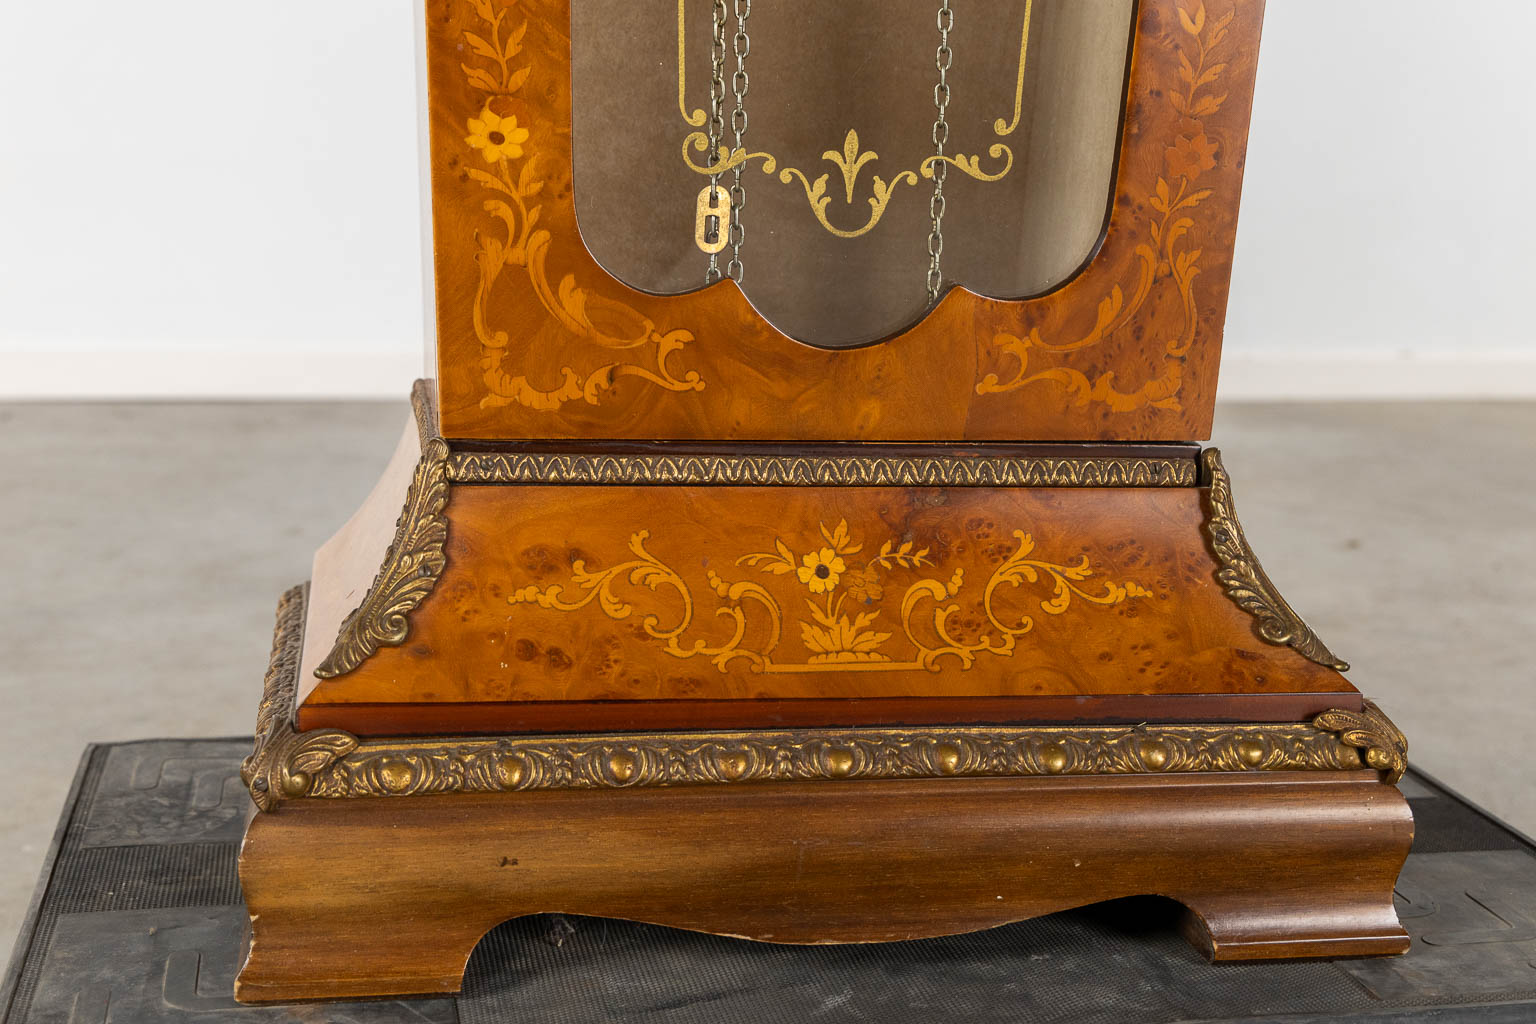 A cartel clock on a pedestal, Westminster movement, marquetry inlay and mounted with bronze. (L:29 x W:47 x H:190 cm)